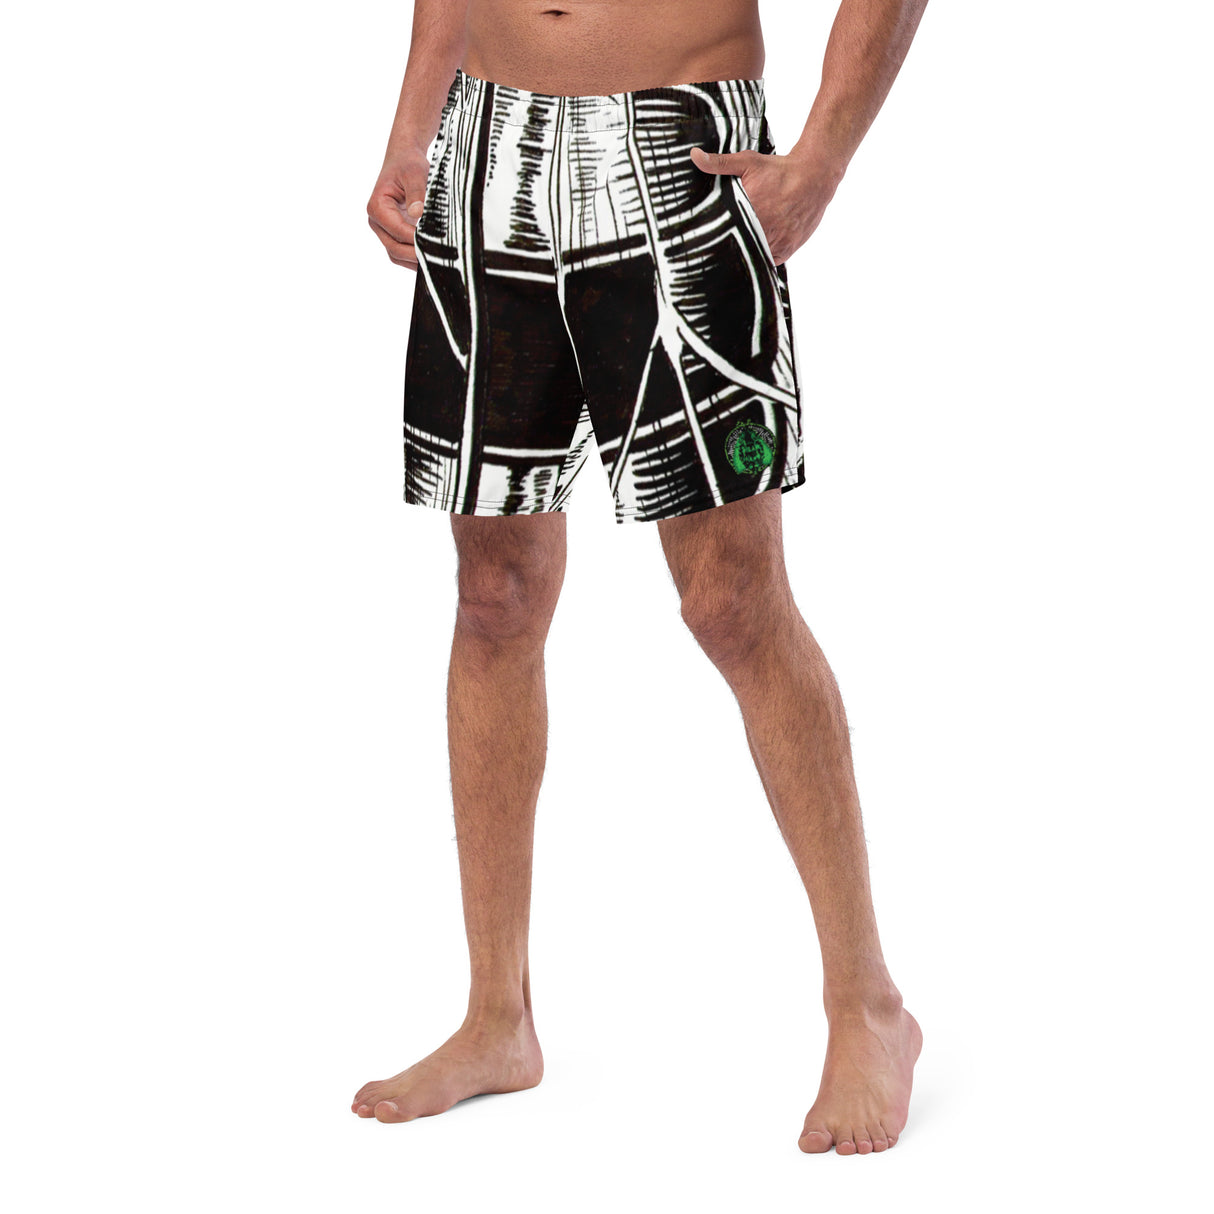 Men's Swim Trunks and Shorts - UPF 50+ with Hive Bee Print